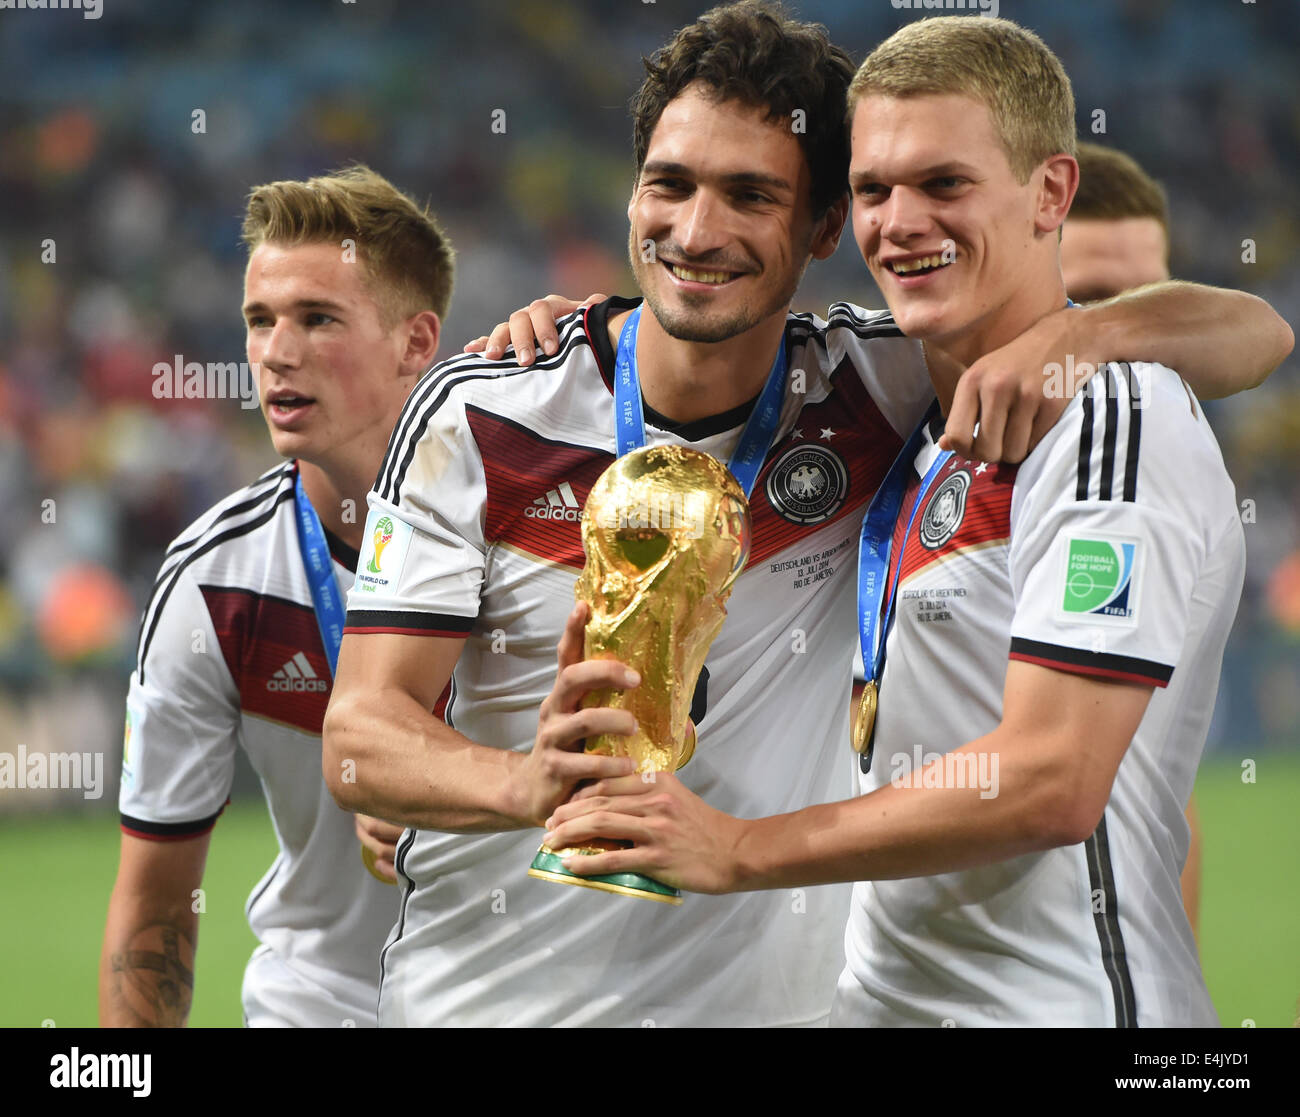 Rio de Janeiro, Brazil. 13th July, 2014. Germany's Erik Durm, (L-R) Mats Hummels and Matthias Ginter celebrate on the pitch with the World Cup trophy after winning the FIFA World Cup 2014 final soccer match between Germany and Argentina at the Estadio do Maracana in Rio de Janeiro, Brazil, 13 July 2014. Photo: Marcus Brandt/dpa/Alamy Live News Stock Photo